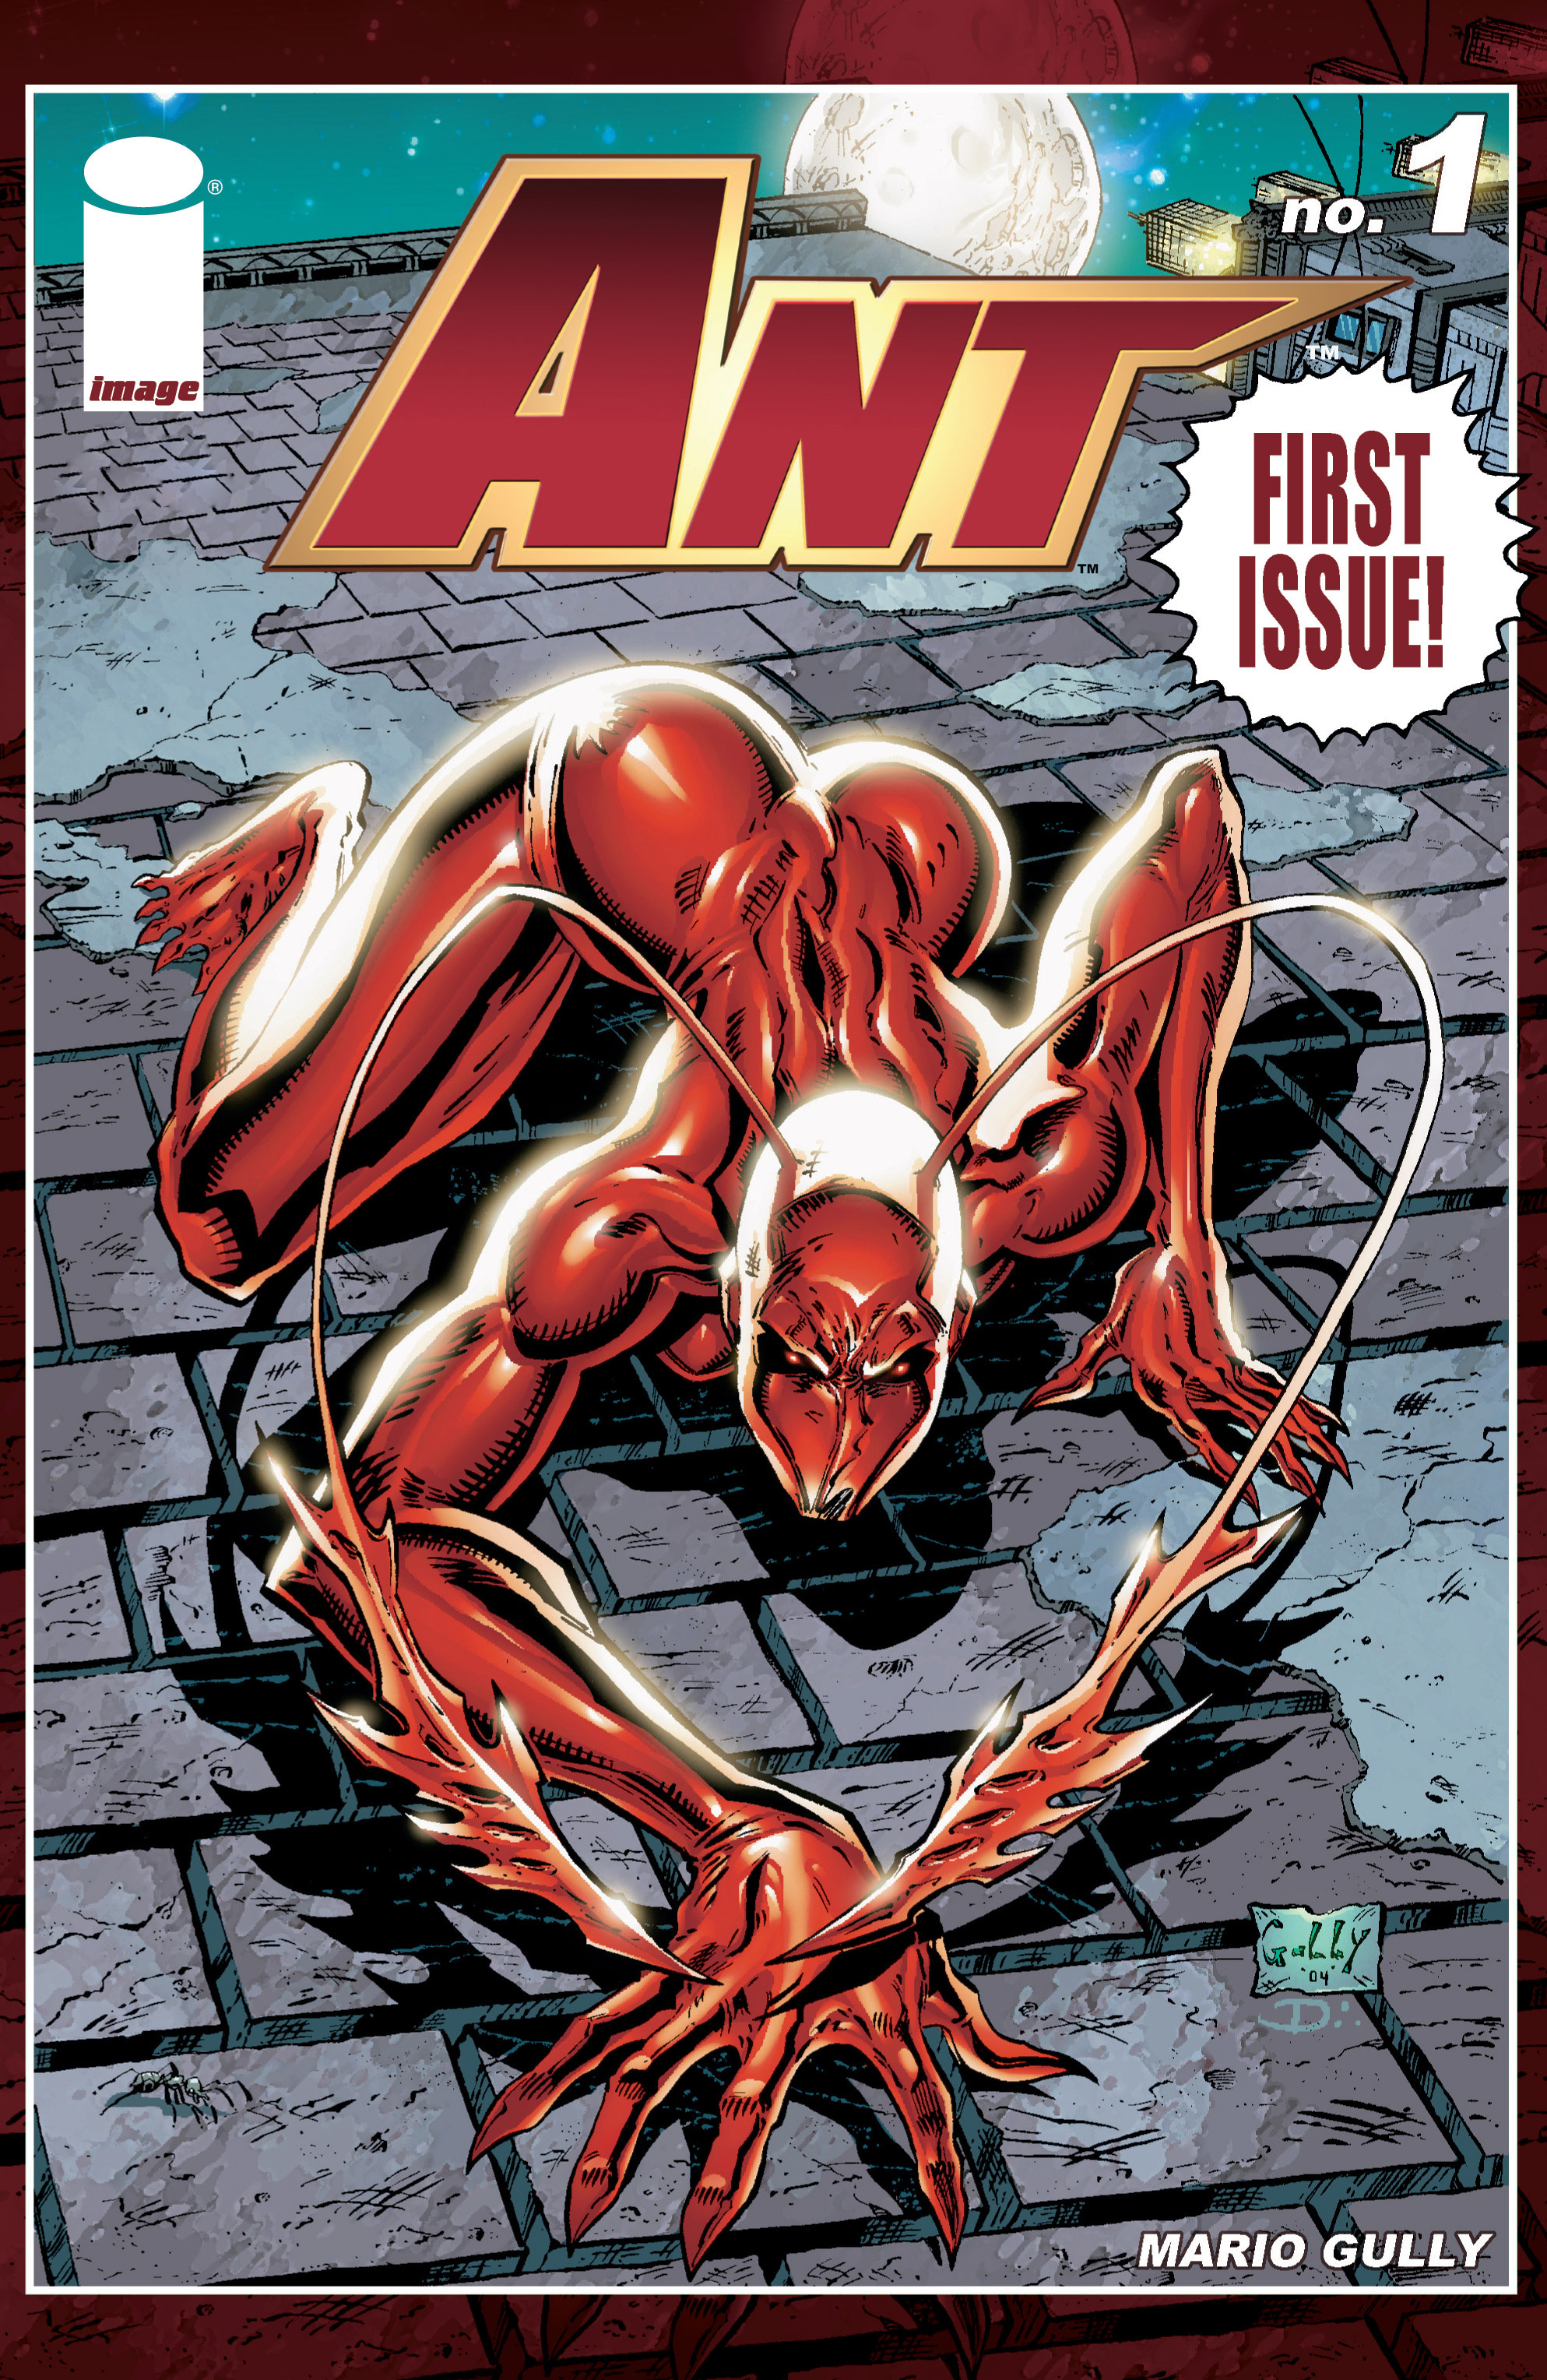 Ant Issue 1 | Read Ant Issue 1 comic online in high quality. Read Full Comic  online for free - Read comics online in high quality .